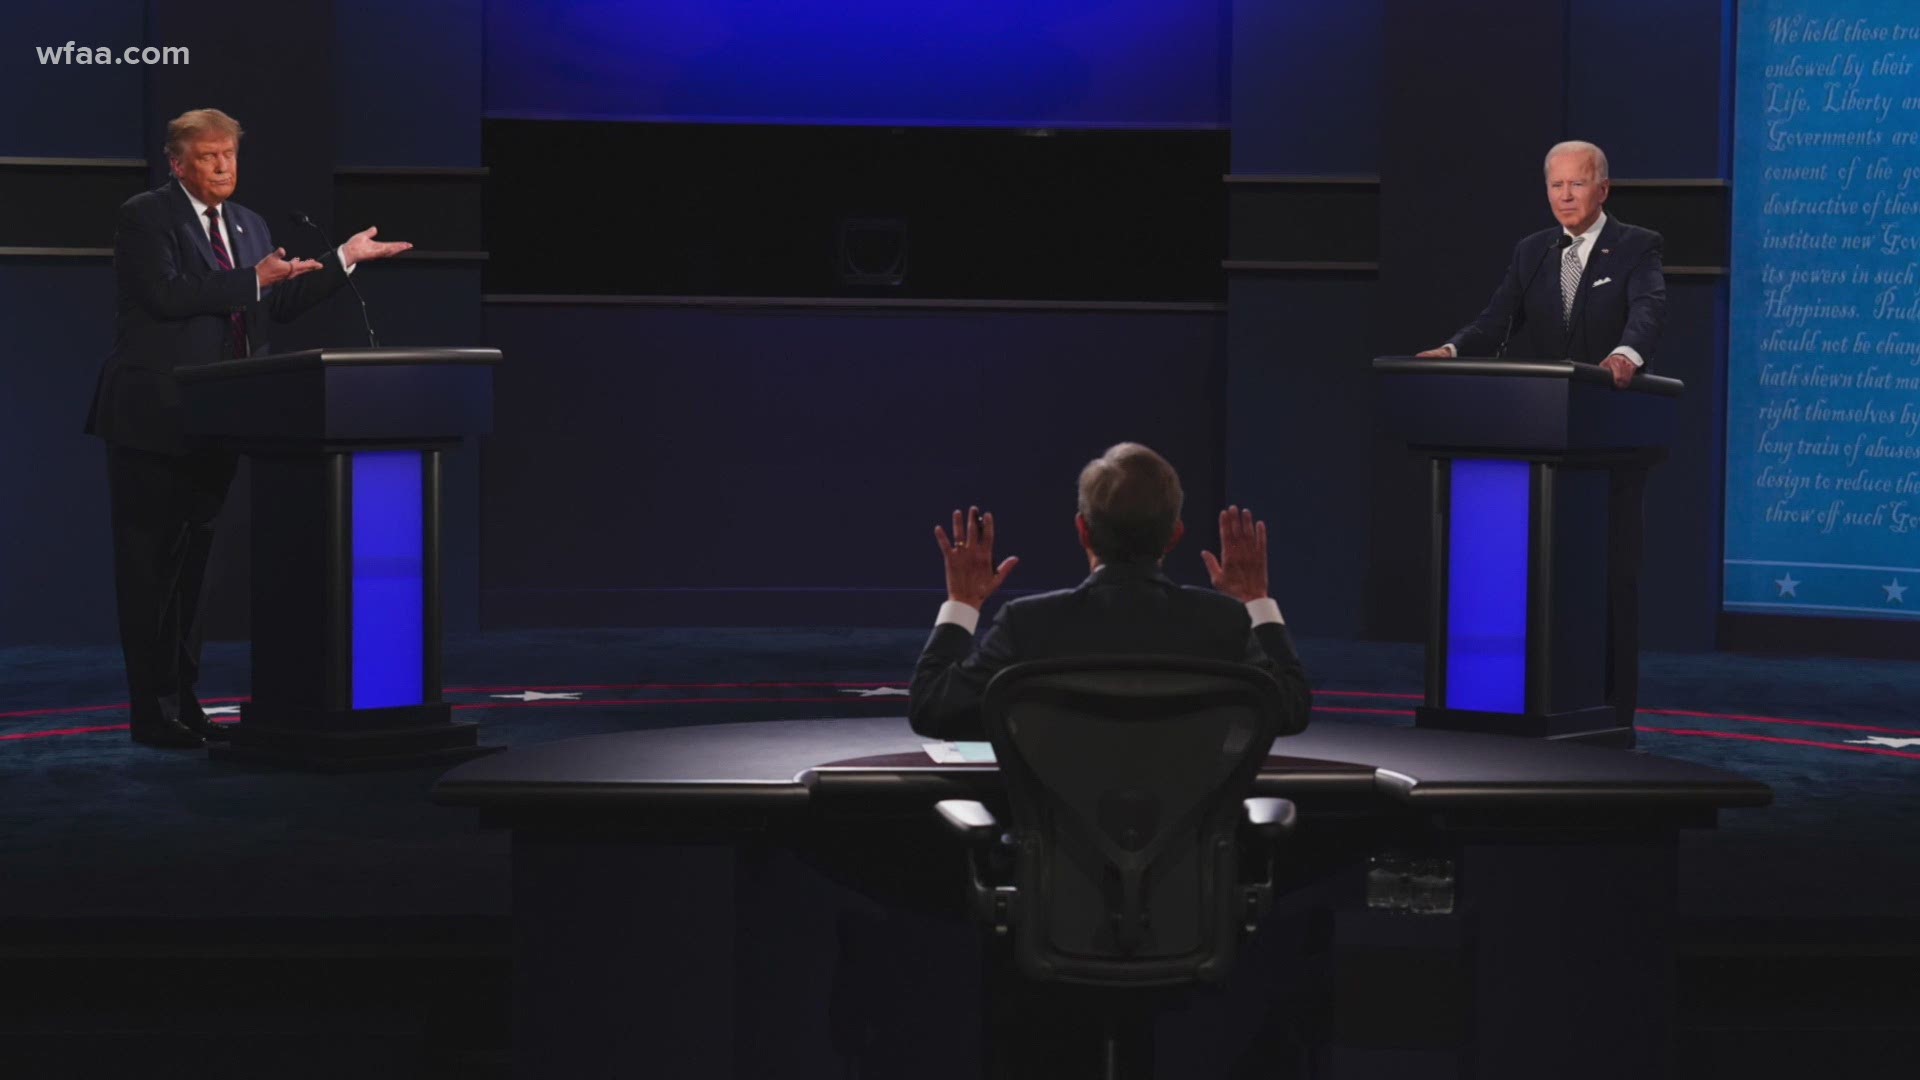 Face-to-face for the first time in the campaign, Tuesday's matchup offered many heated moments, cross talk and pleading from the moderator to stick to the rules.